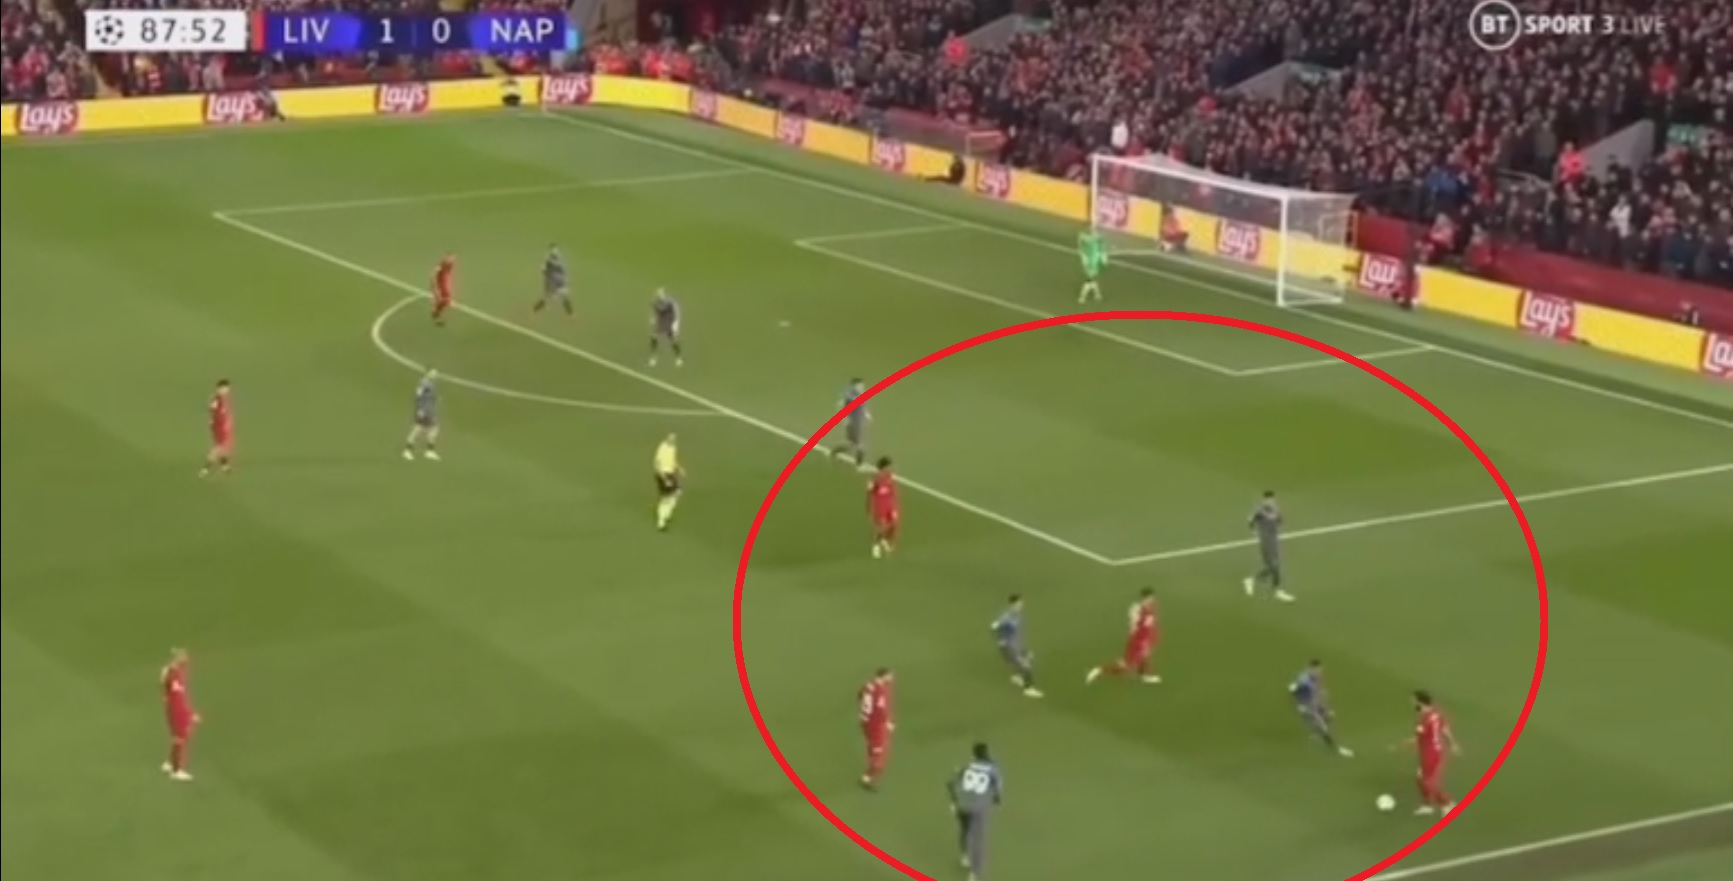 (Video) Four players could unlock Liverpool resurgence after superb team move spotted v Napoli